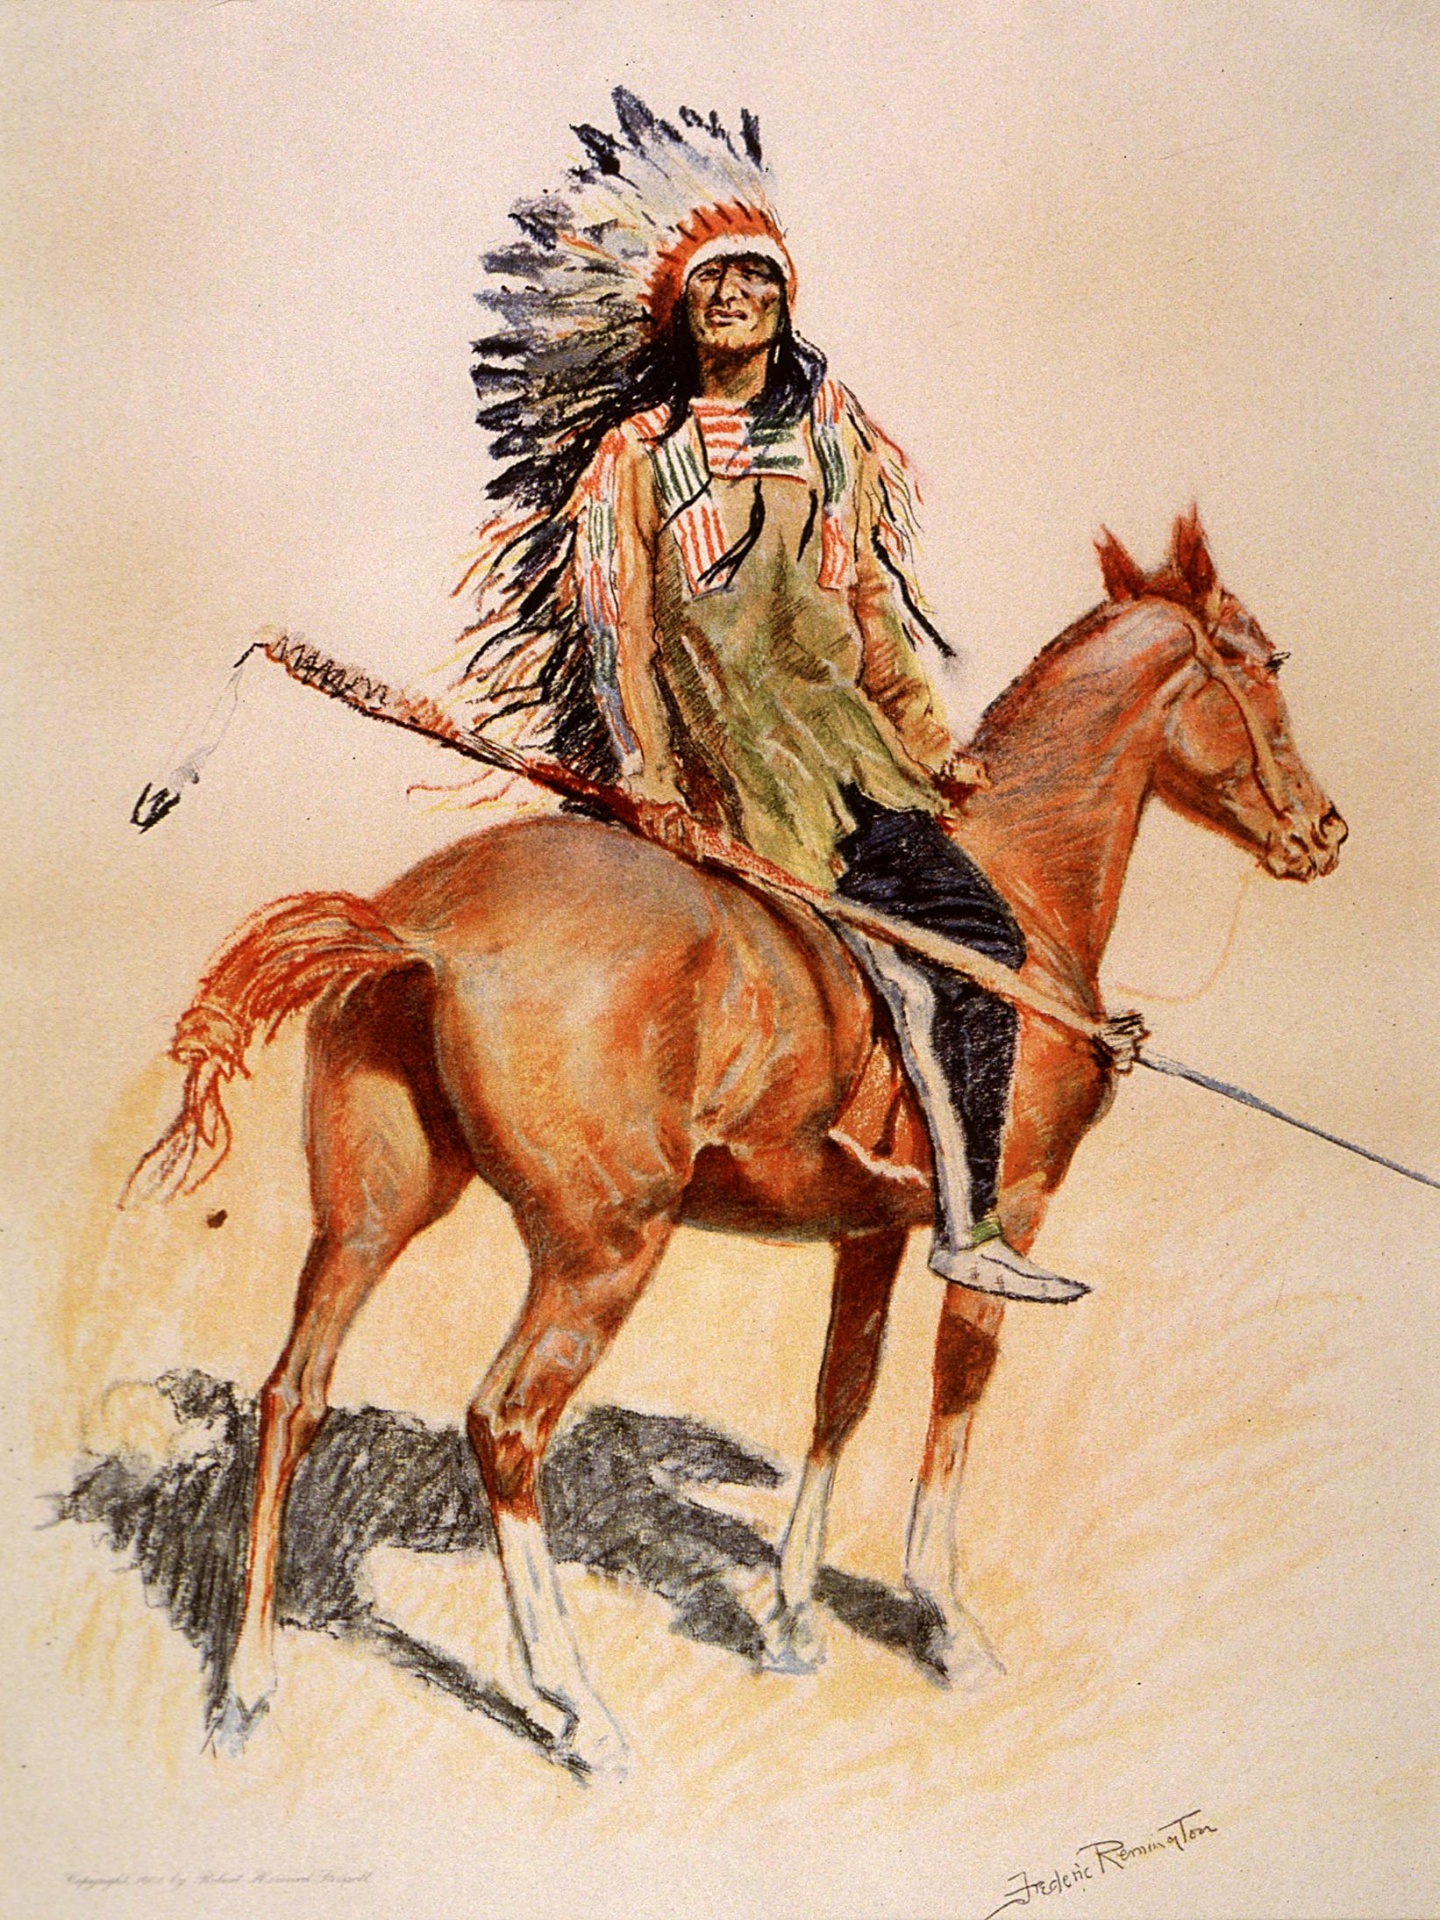 A handsome Native American Sioux chief, mounted on a horse